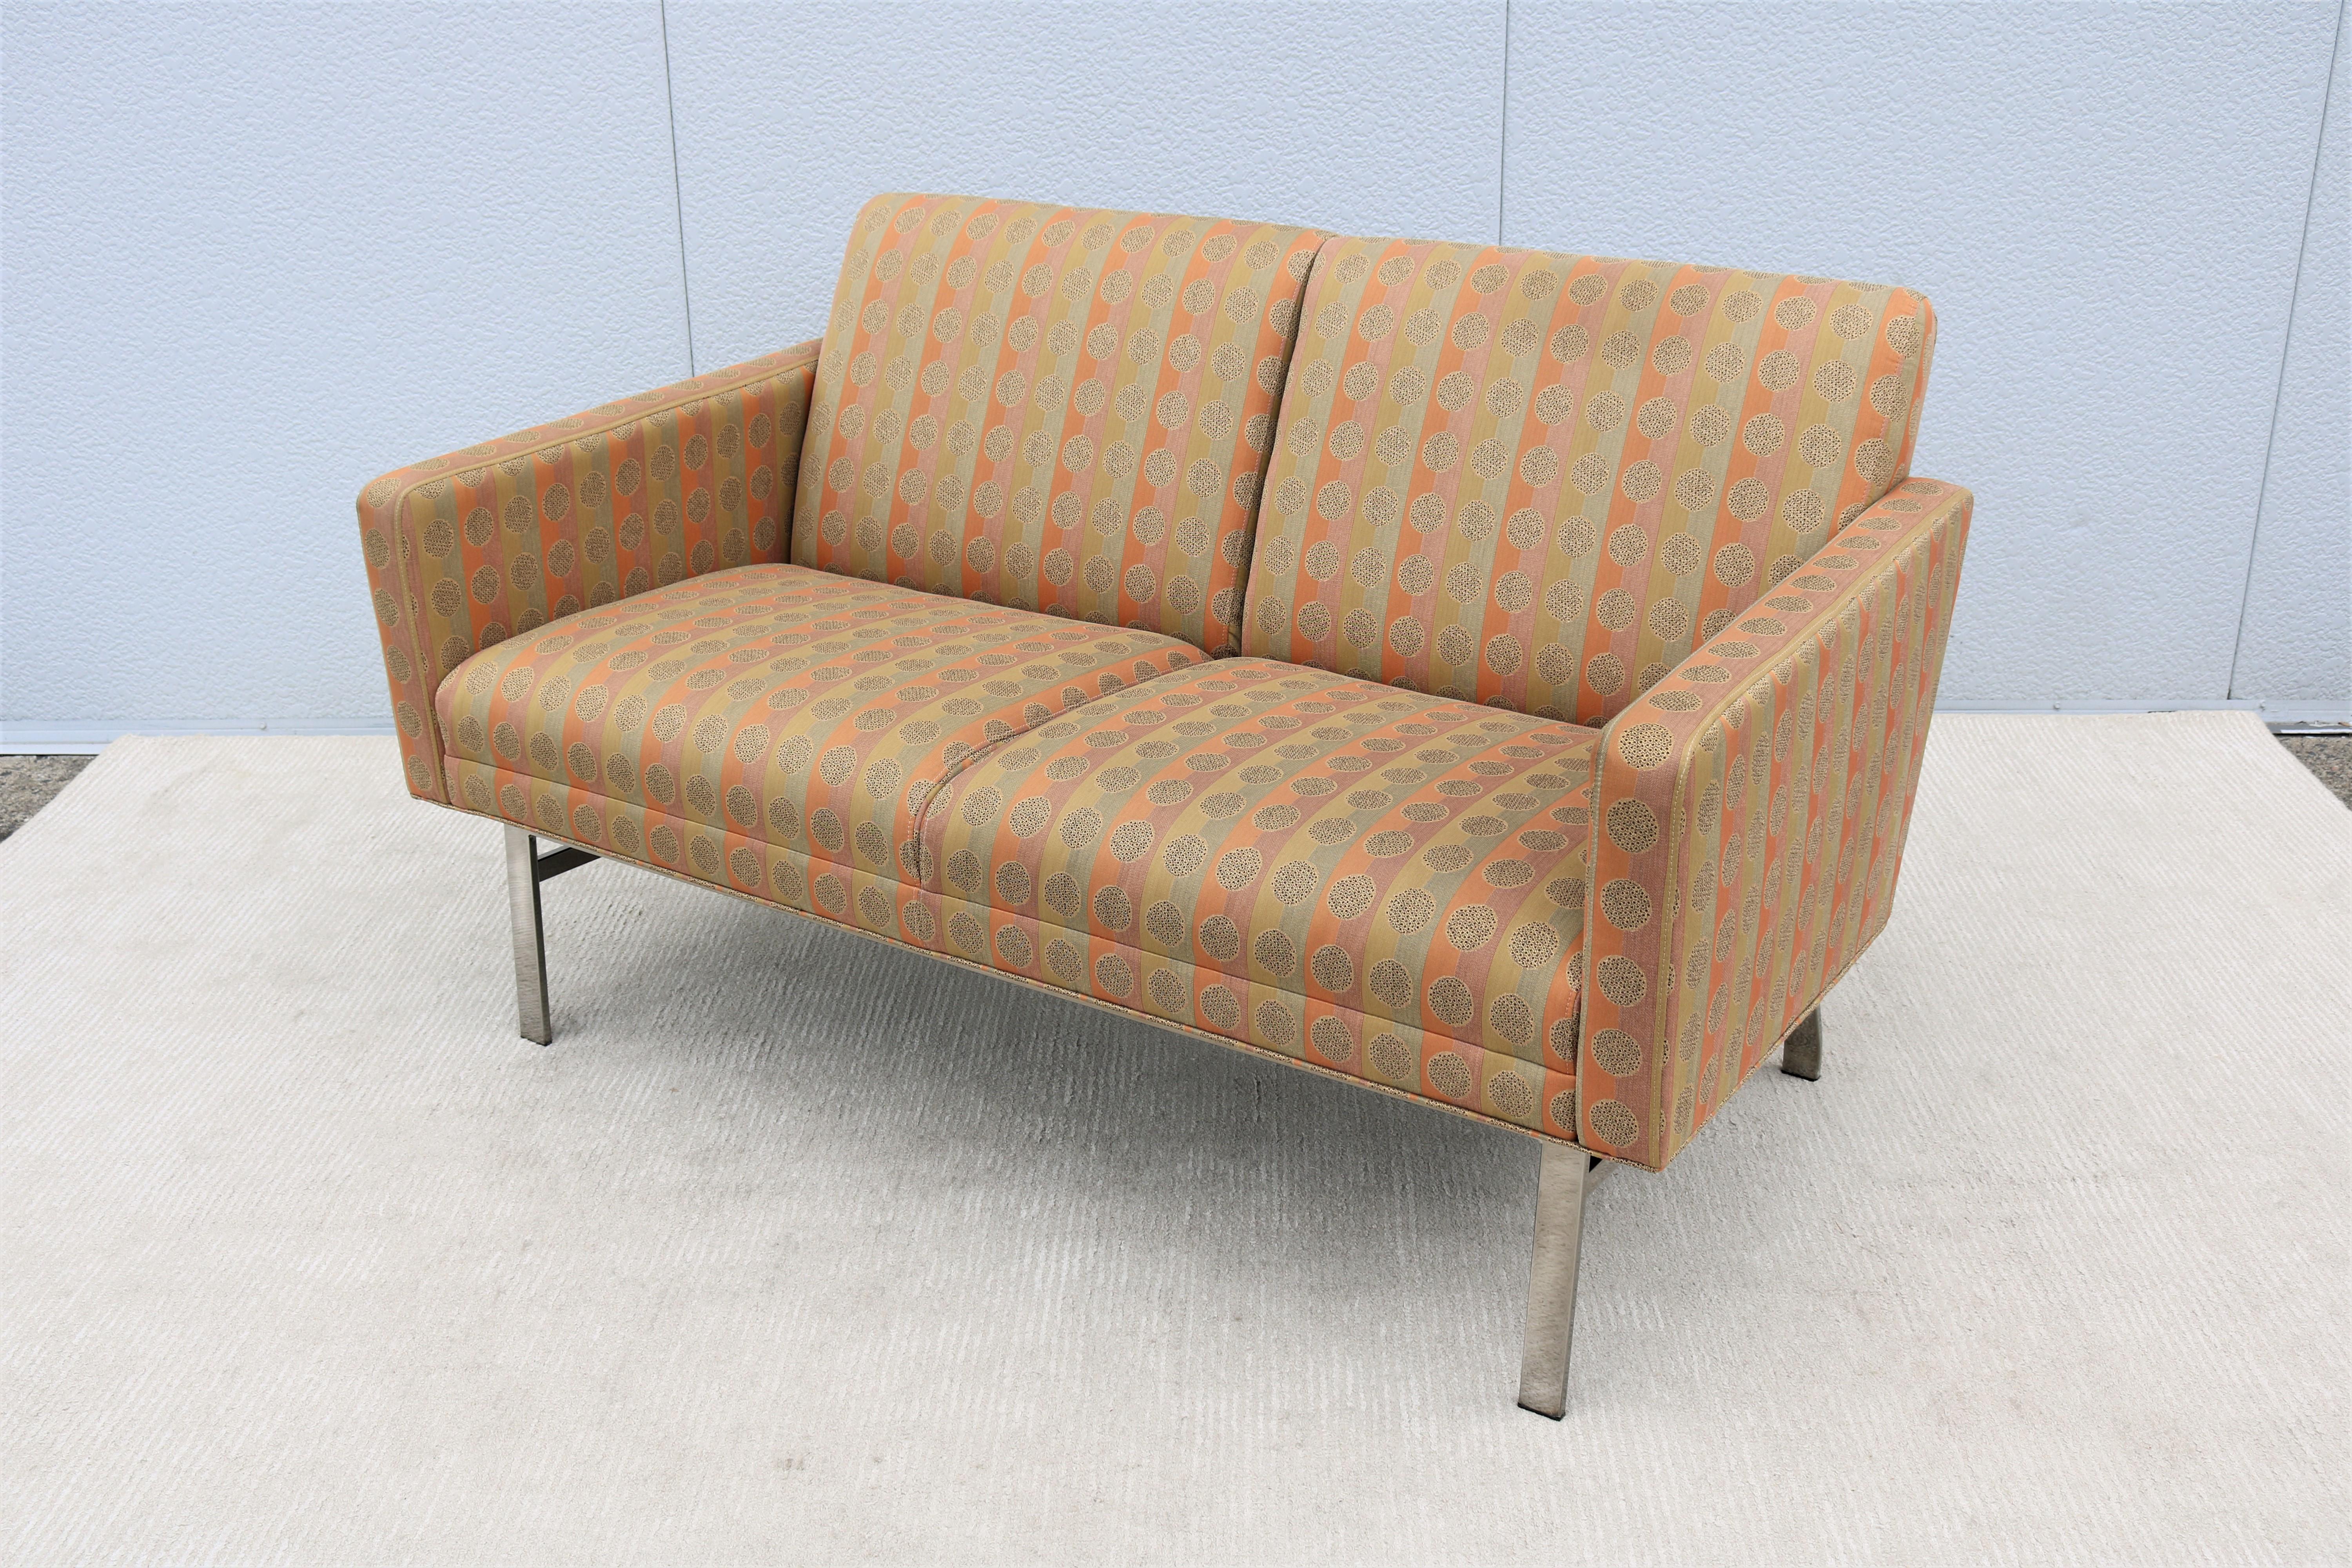 Steel Mid-Century Modern Style Jack Cartwright Kelly Settee 2 Seats Sofa, 2 Available For Sale